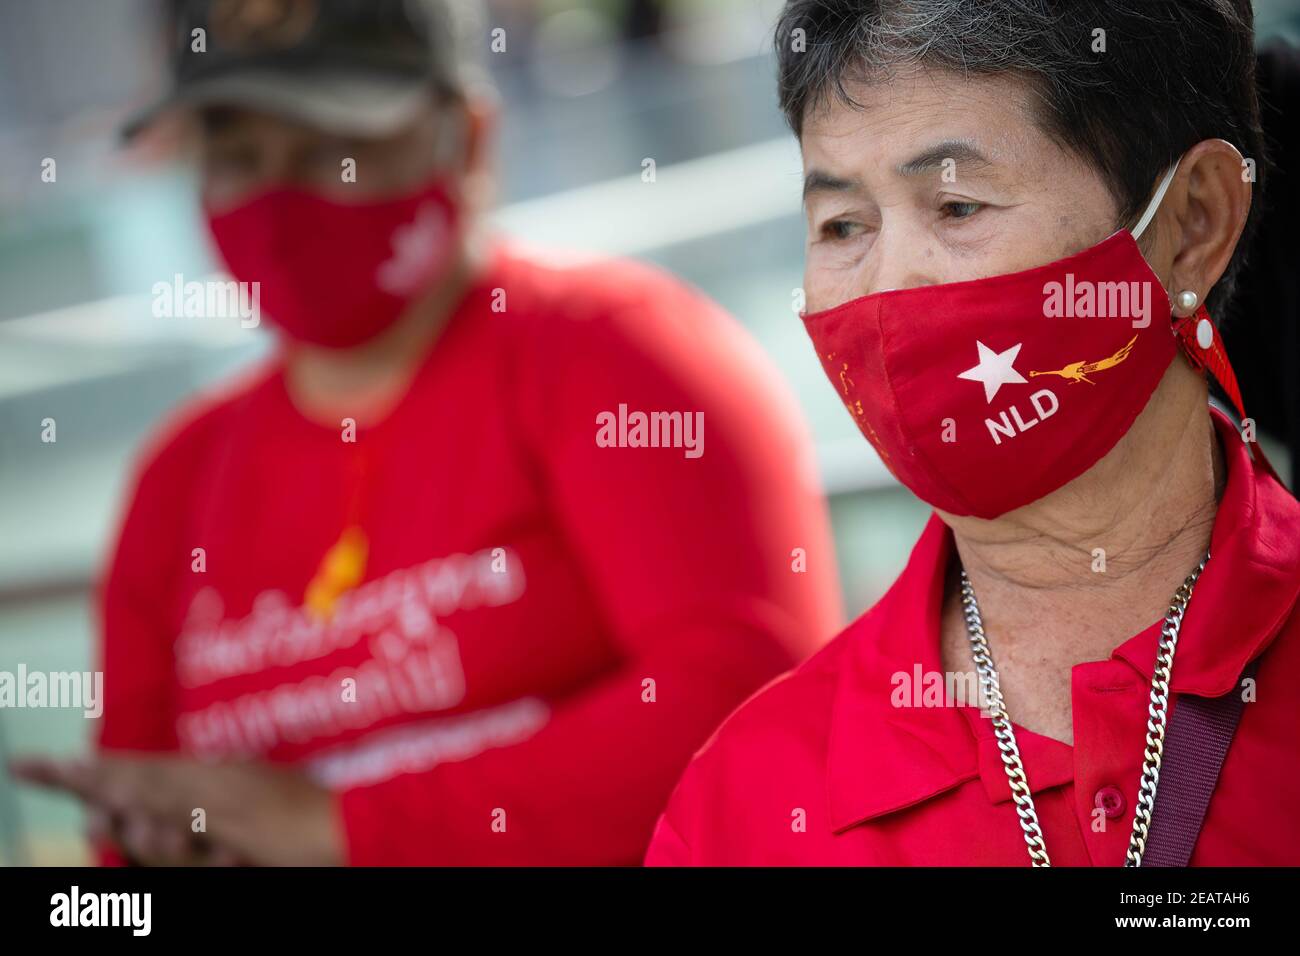 An elderly wearing an NLD (National League for Democracy) dances during a 'make noise' protest to denounce the recent junta military coup in Myanmar and reject Article 112 of the Thai penal code.Thousands of pro-democracy protesters staged a demonstration, outside of MBK Shopping Mall at Siam, called ‘Make Noise' by banging kitchen utensils in solidarity with the anti military coup protesters in Myanmar as well as rejecting the Section 112 of the Thai penal code. The protesters also demand the resignation of Thailand Prime Minister Prayut Chan-o-cha and the reform of the monarchy. Stock Photo